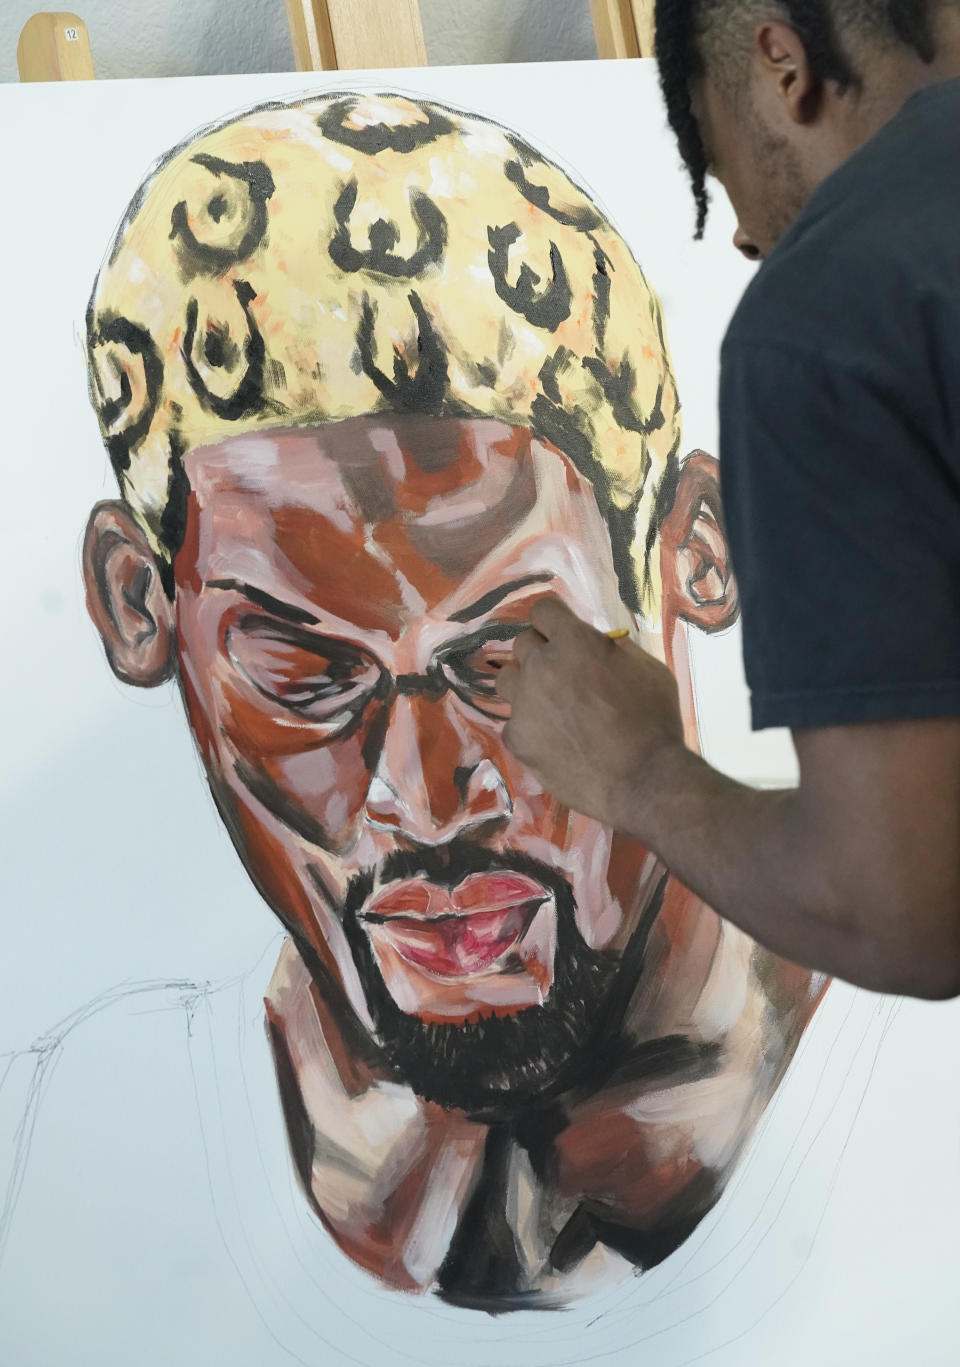 SMU defensive back RaSun Kazadi works on a painting at his apartment Wednesday, Aug. 11, 2021, in Dallas. The end of the NCAA ban on athletes being able to earn money for their fame and celebrity has led to some of them cashing in on their creative side. (AP Photo/LM Otero)